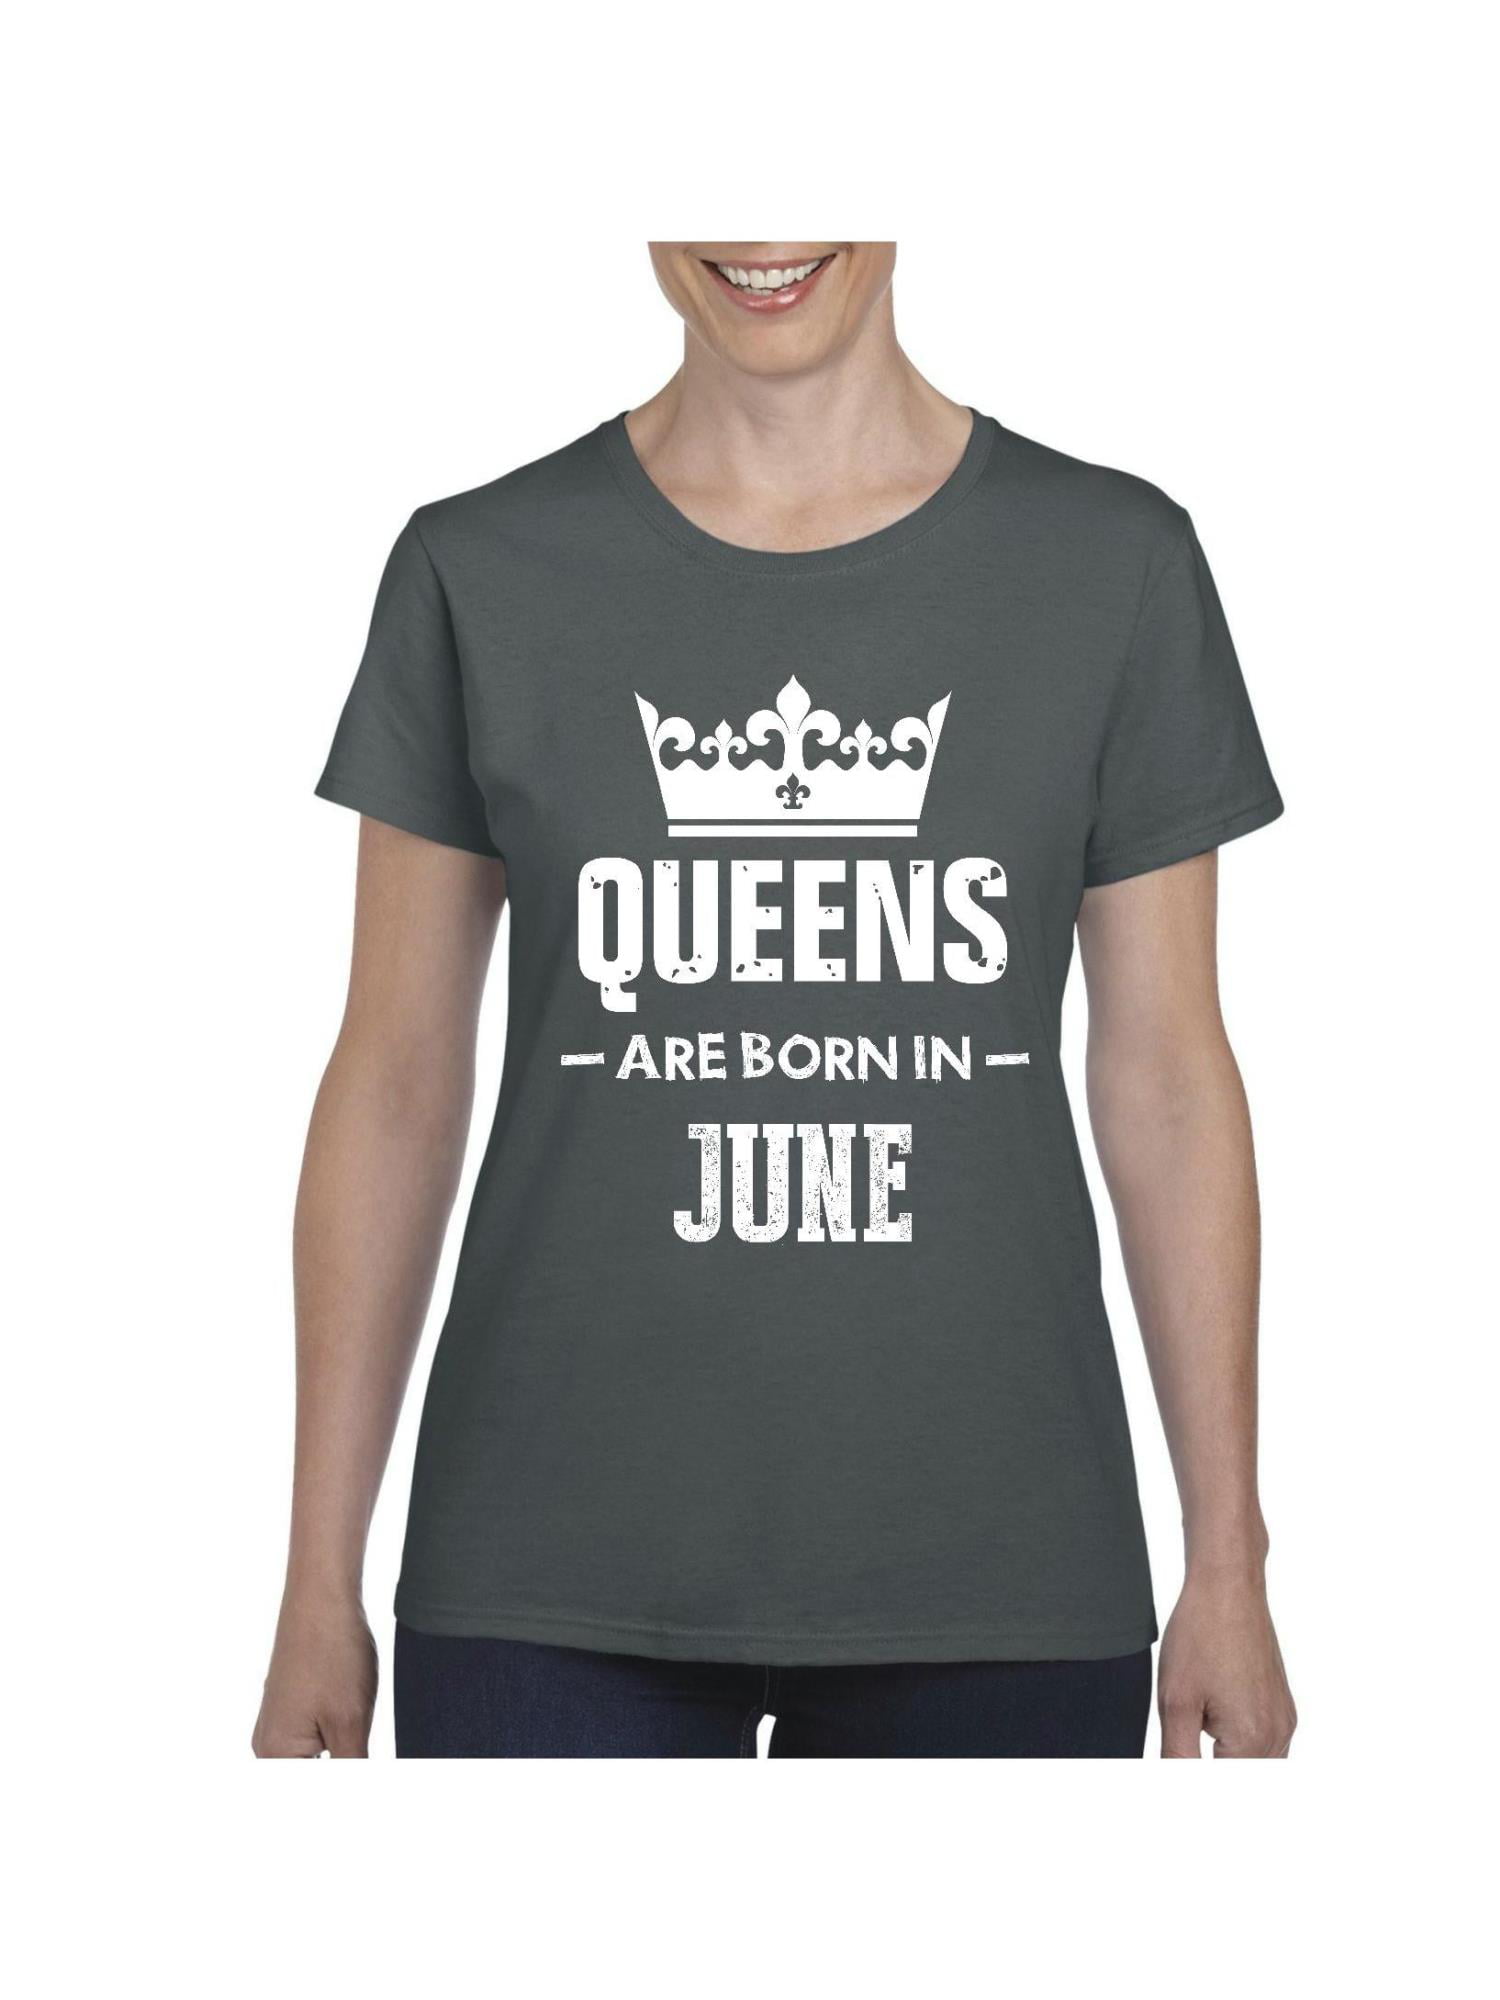 Birthday Girl shirt Queens are Born in June Women's T-shirt gift for her S-3XL 